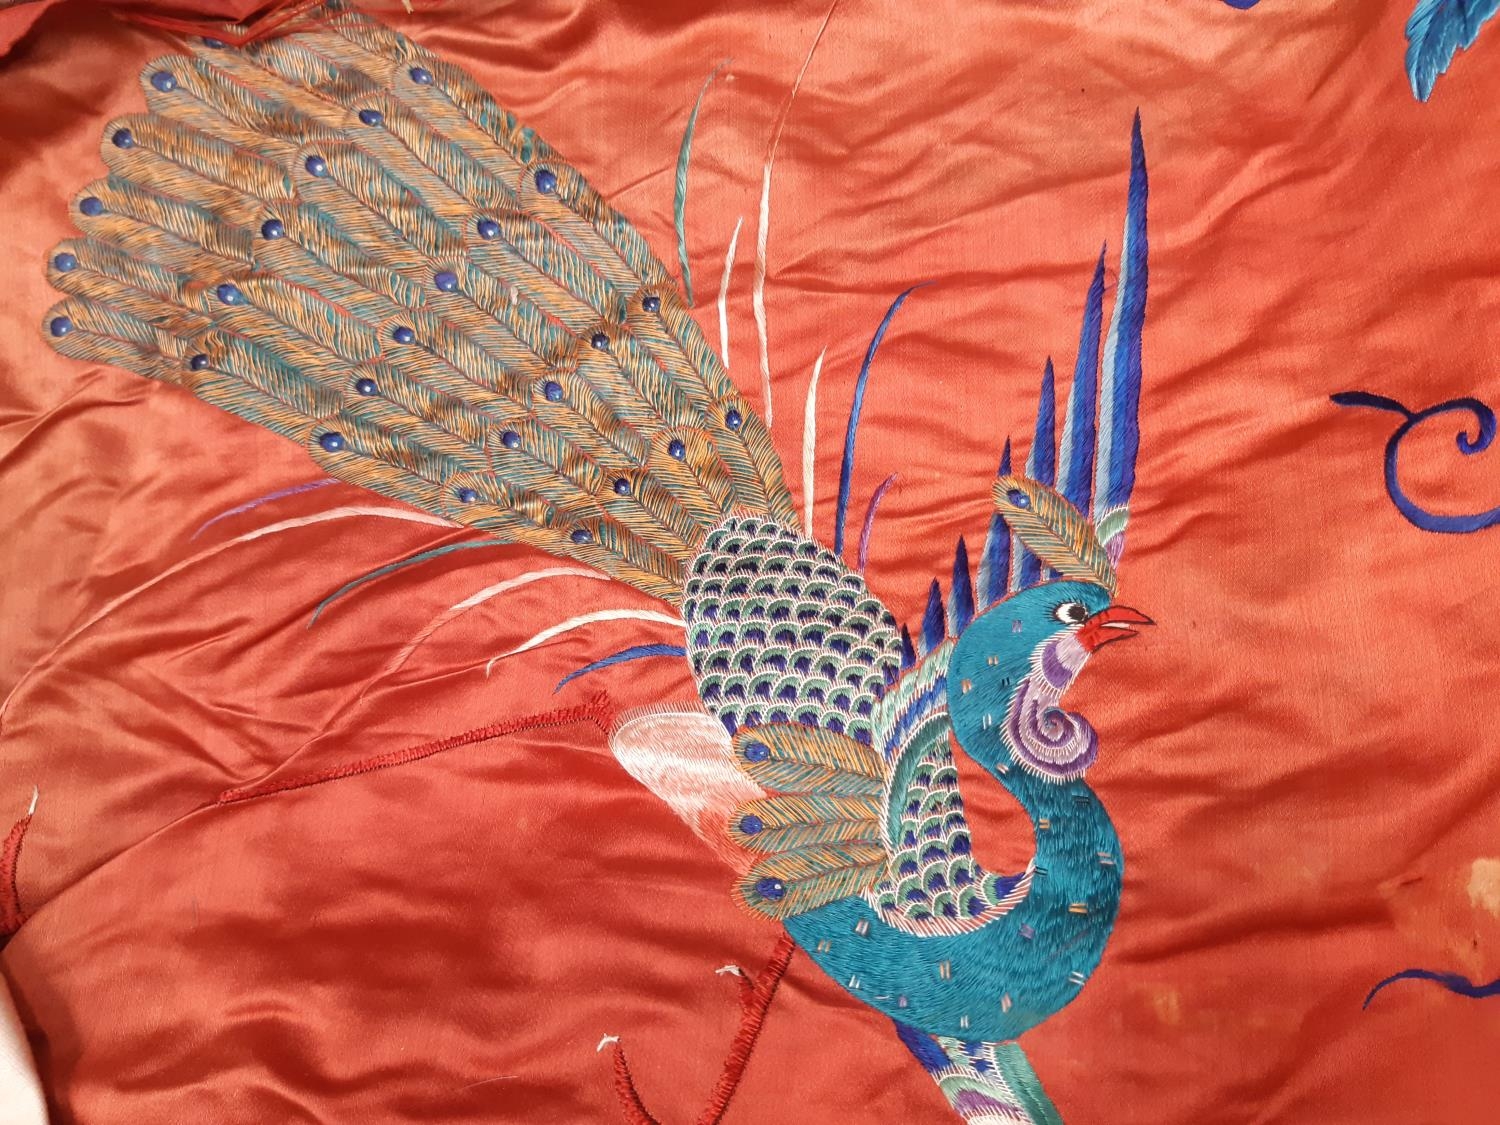 Large antique embroidered silk wall hanging with hand stitched embroidery of peacocks, flowers and - Image 2 of 5